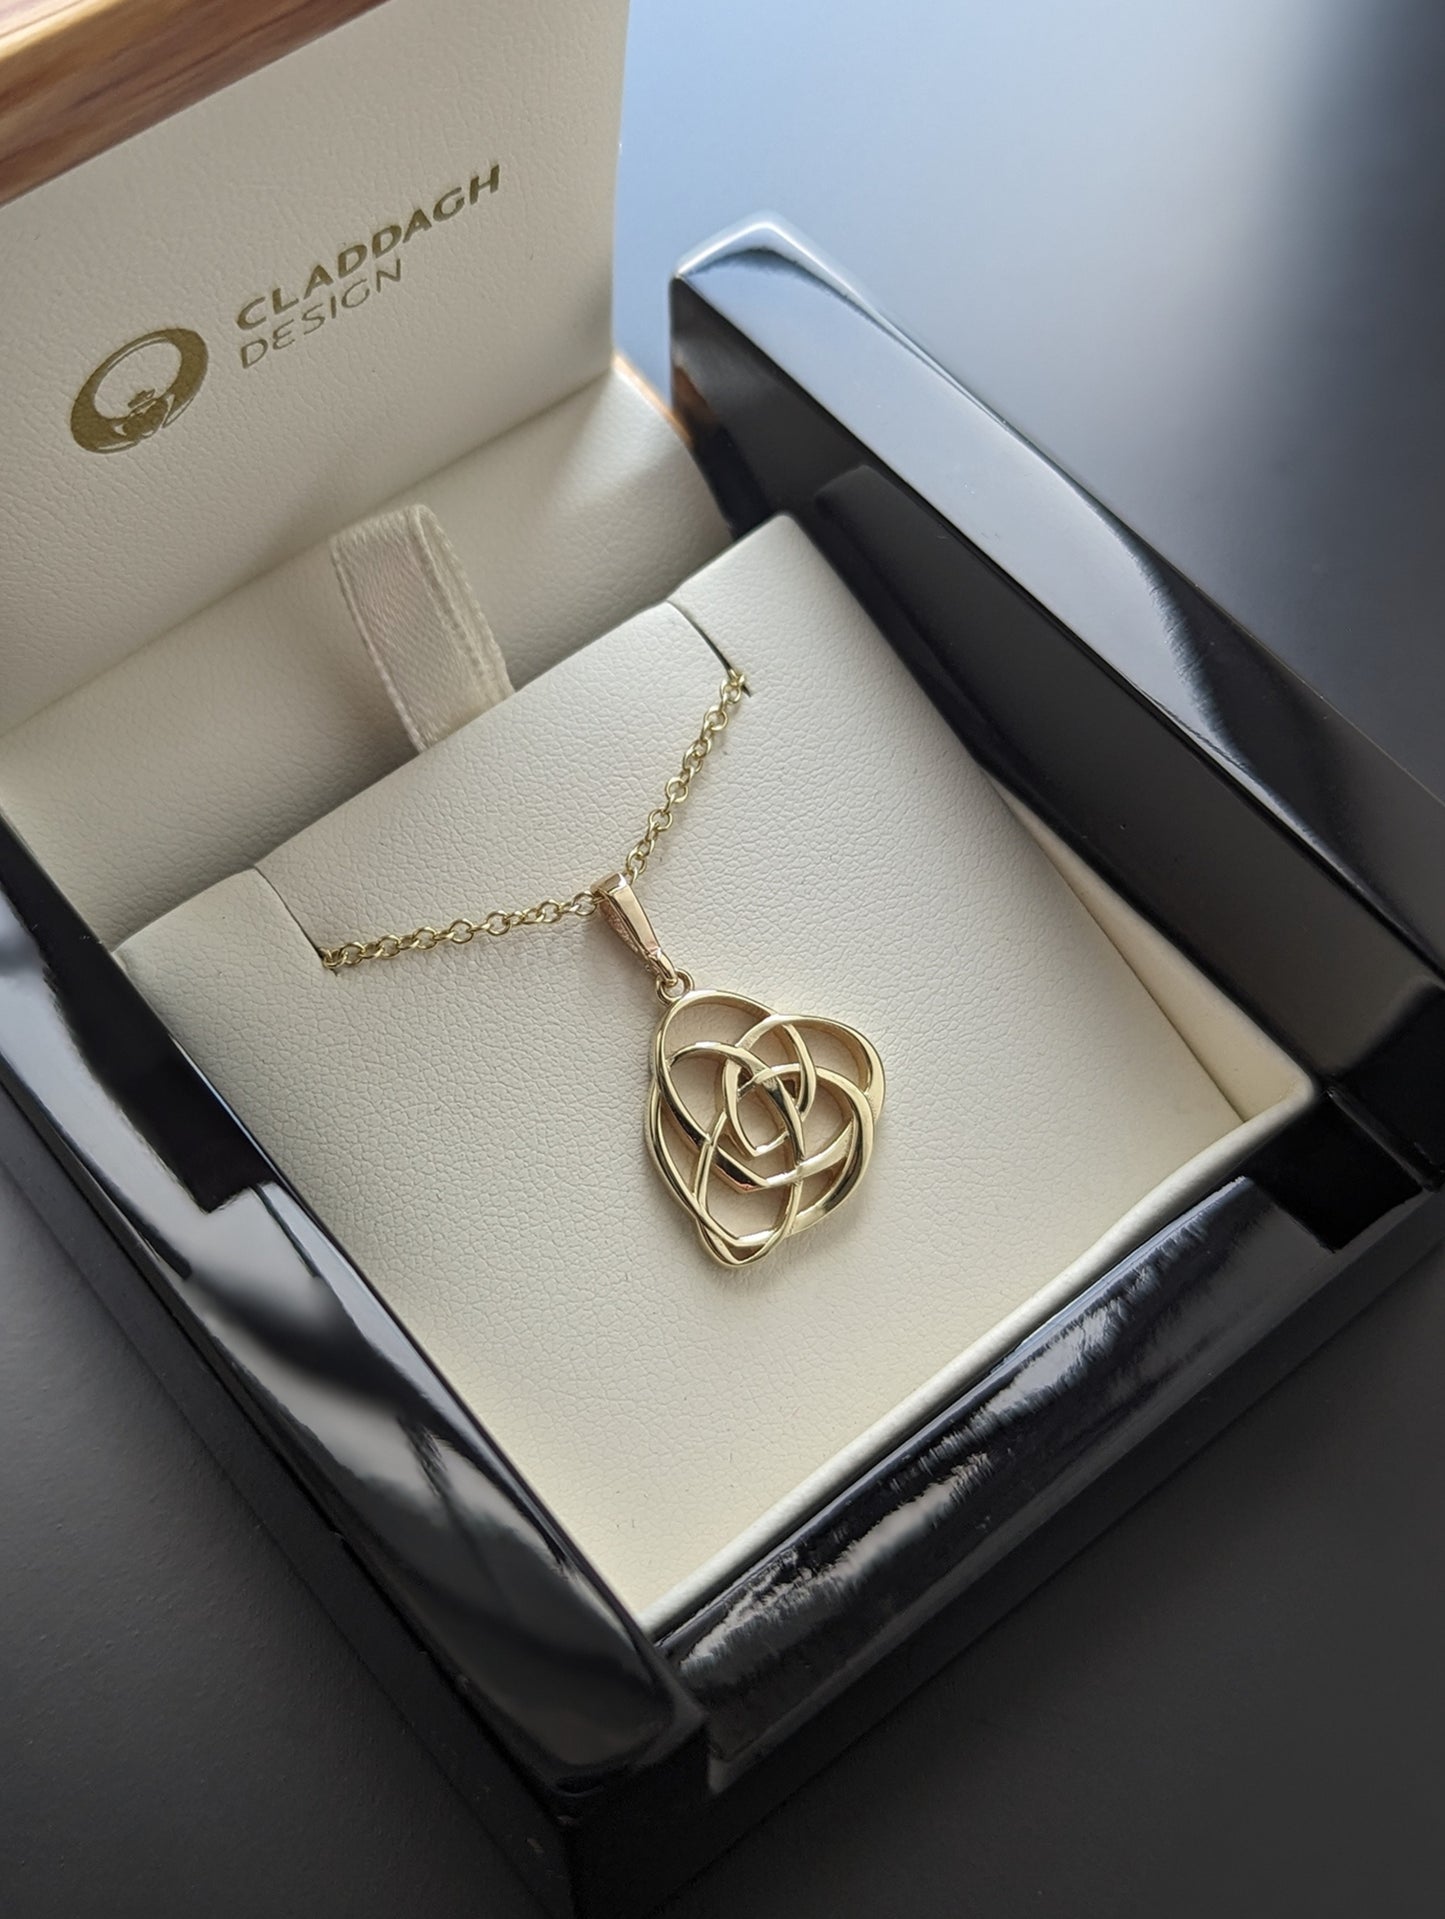 Gold celtic Motherhood Knot Necklace in box